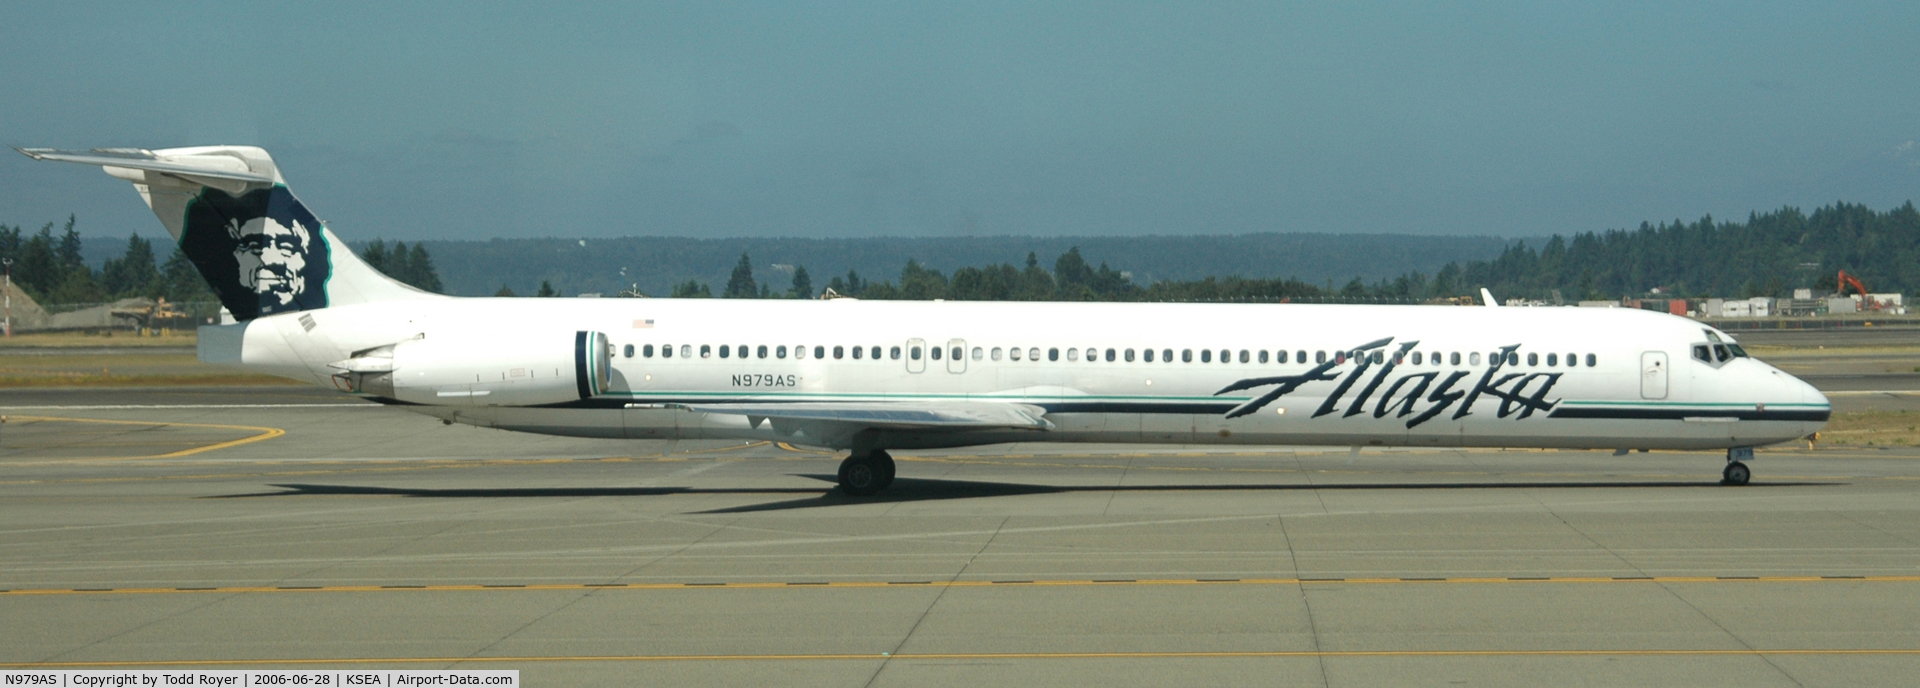 N979AS, 1996 McDonnell Douglas MD-83 (DC-9-83) C/N 53471, Taxi to gate